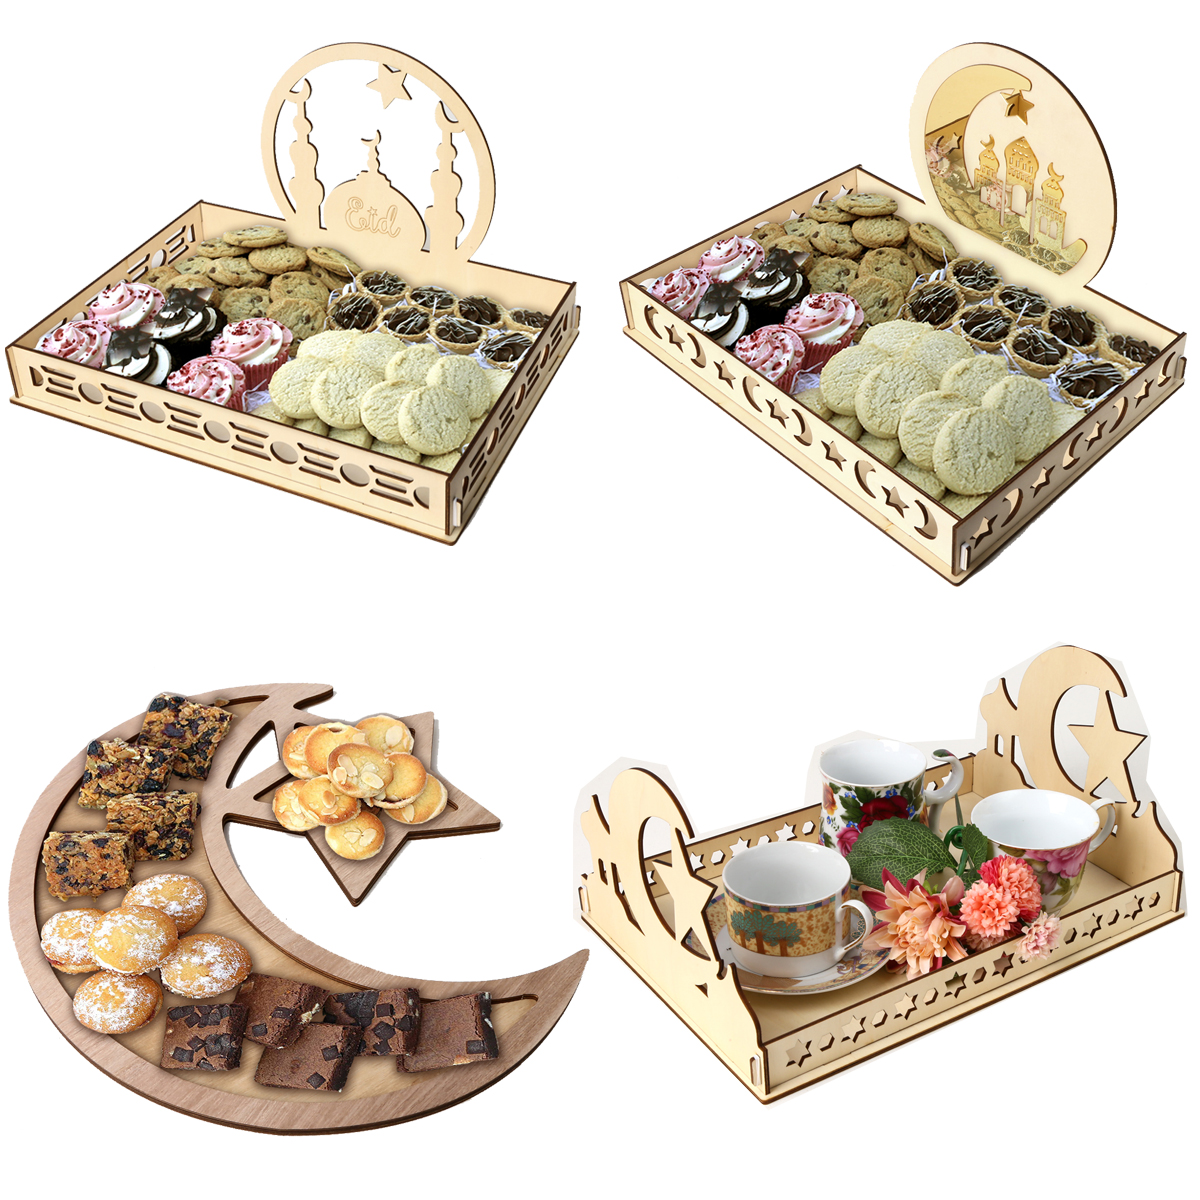 Rustic-Wooden-Islam-Ramadan-Food-Serving-Tray-Pastry-Dinner-Plates-Holder-Decorations-1453425-2